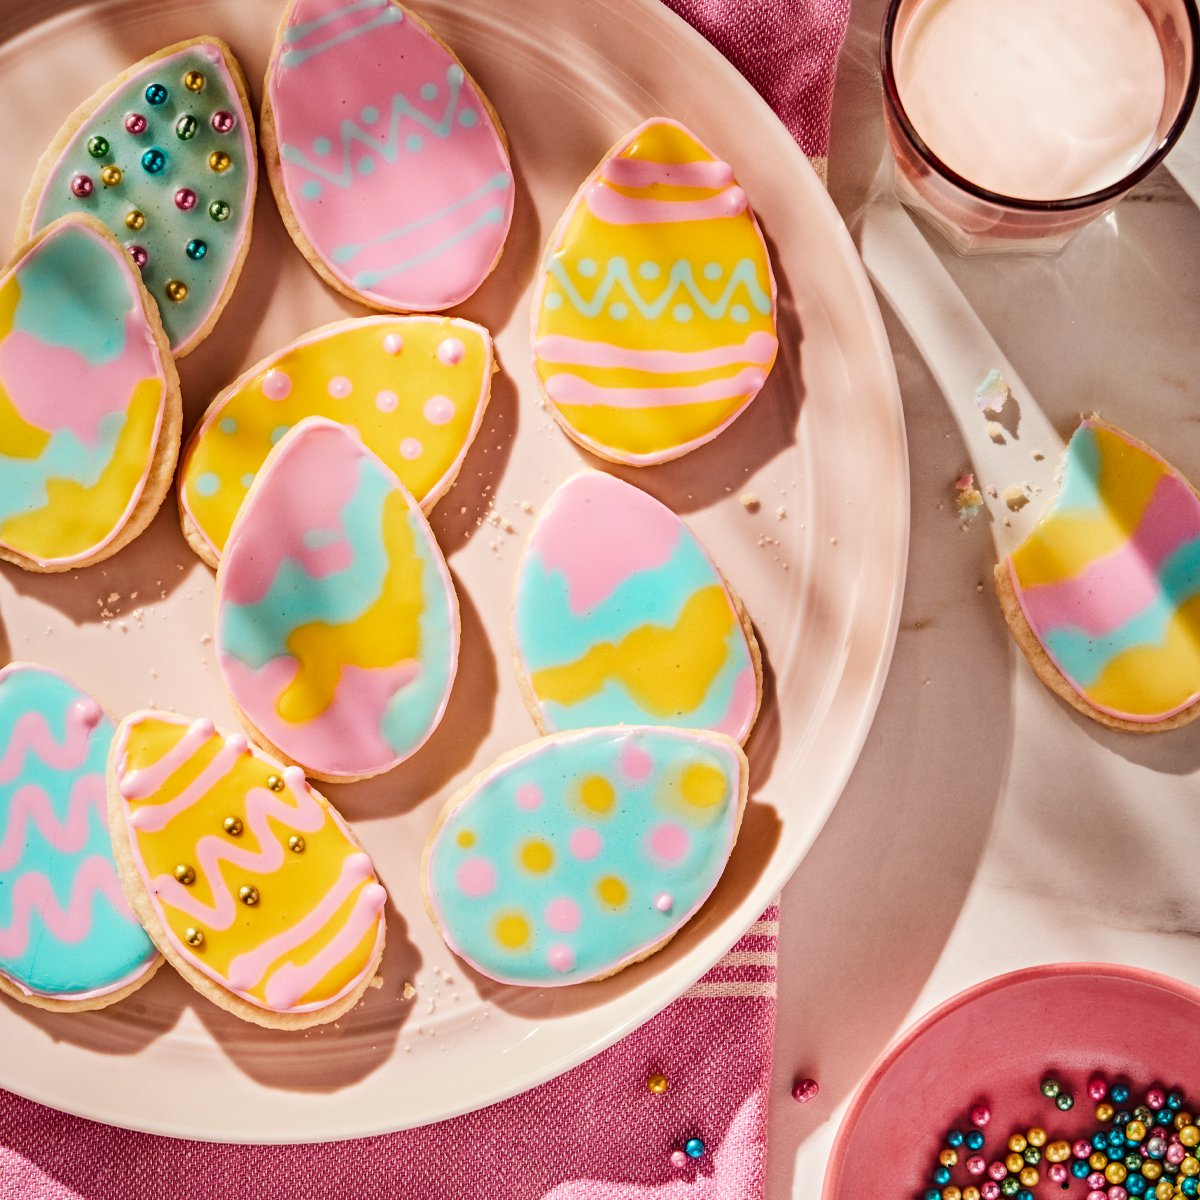 Spring baking starts here! Try our easy step-by-step recipe to make kid-friendly painted spring cookies: longos.com/recipes/icebox…